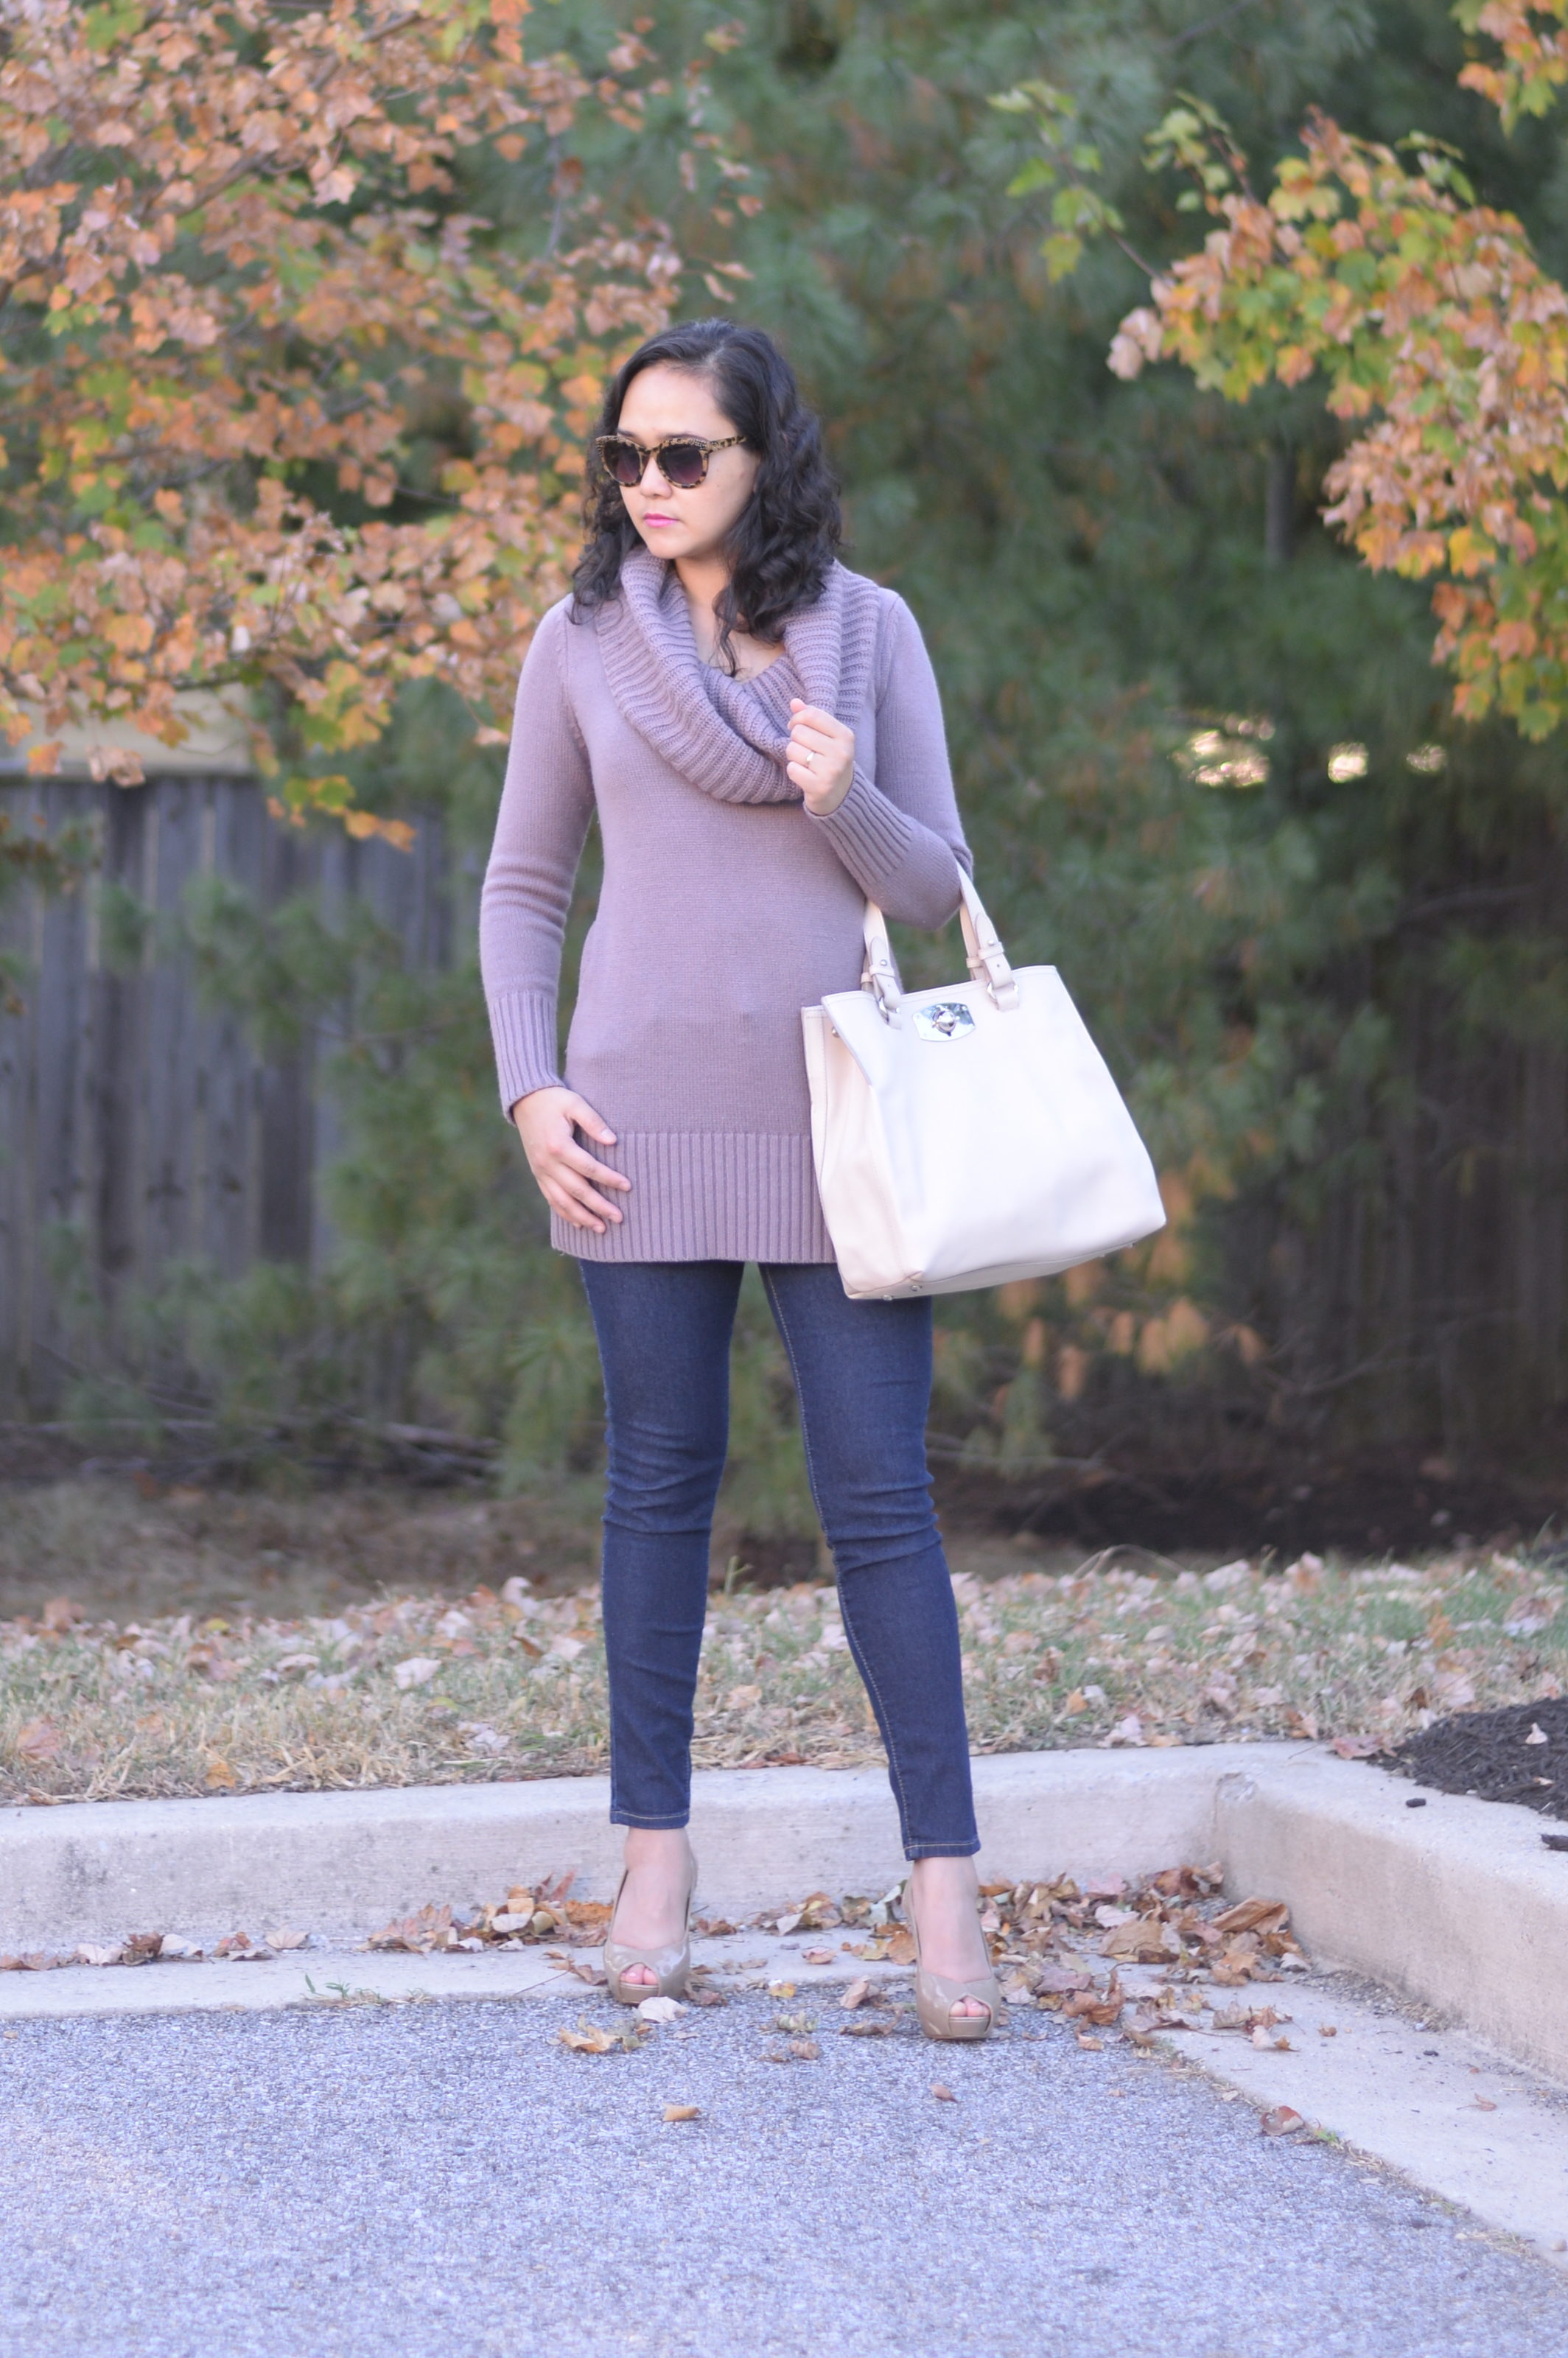 Add This Cowl Neck Sweater To Your Winter Wardrobe